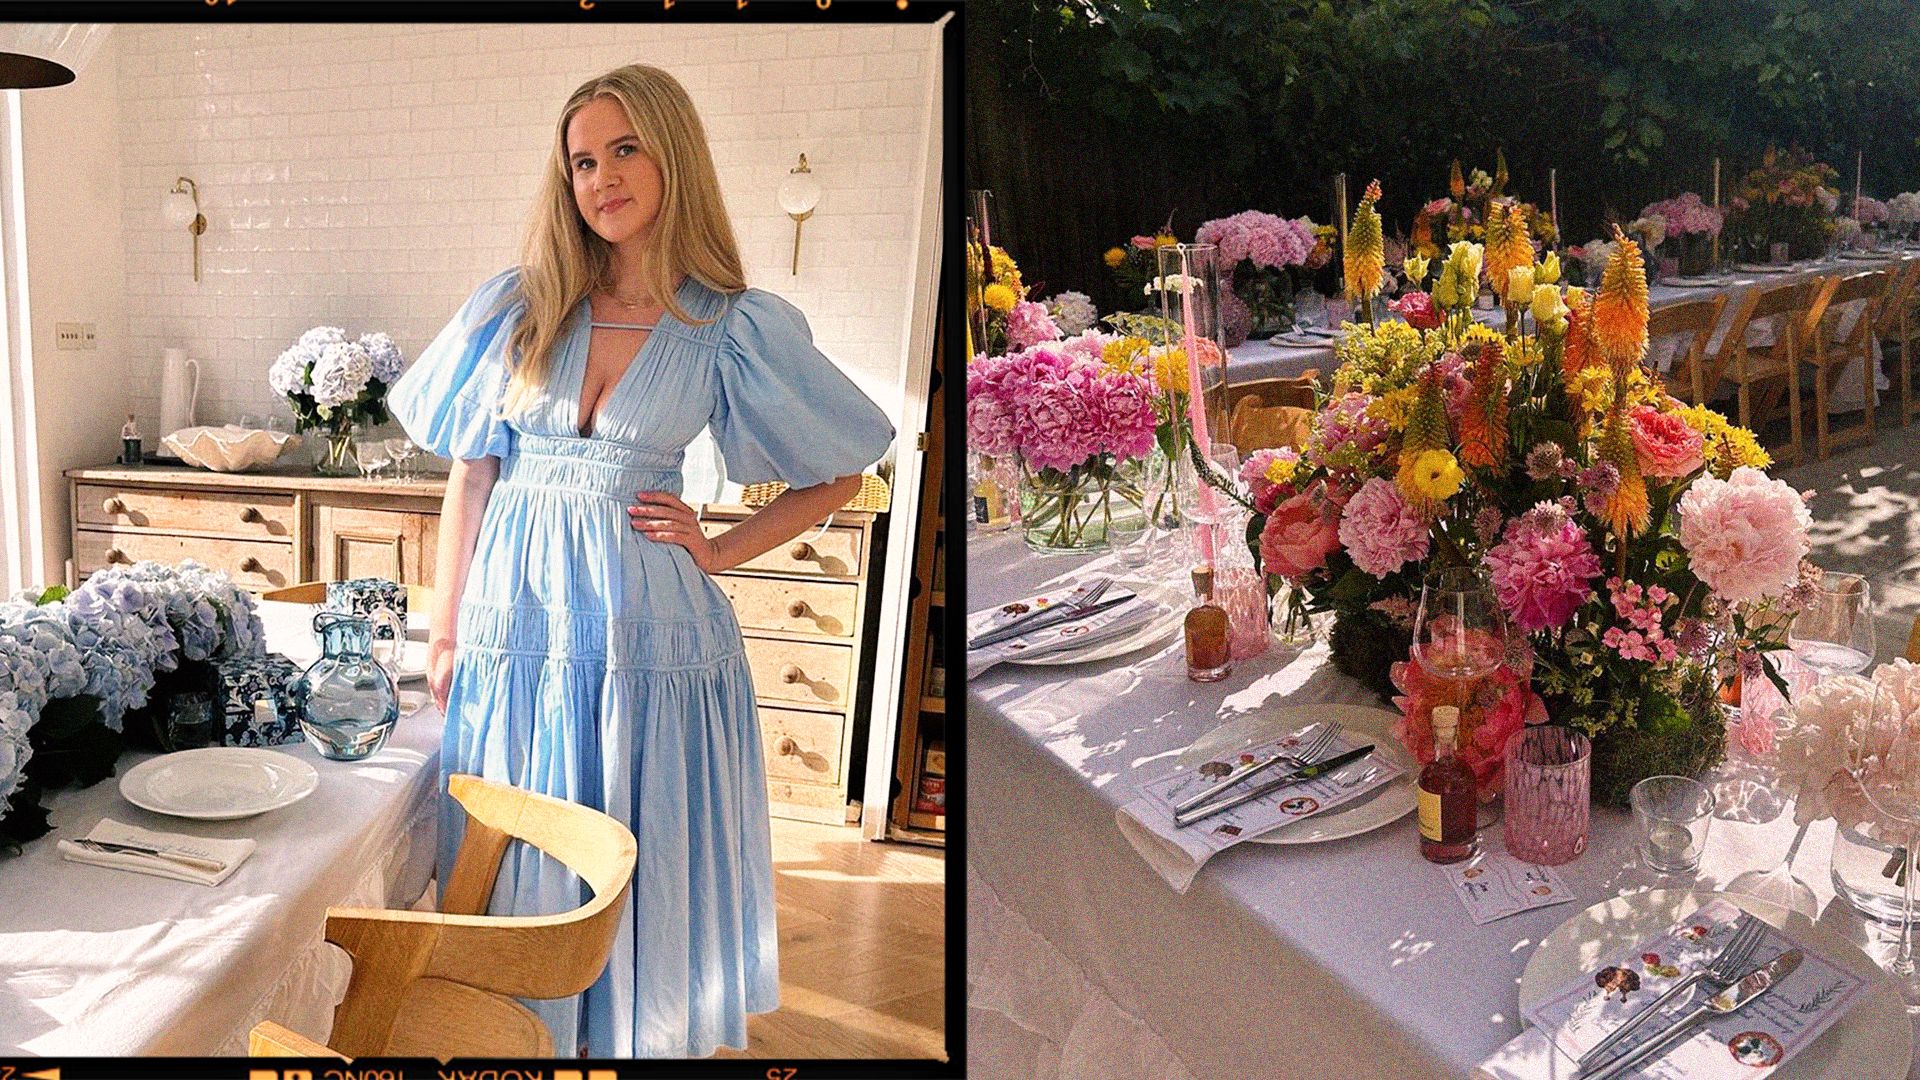 7 Super Tips for Hosting a Dinner Party